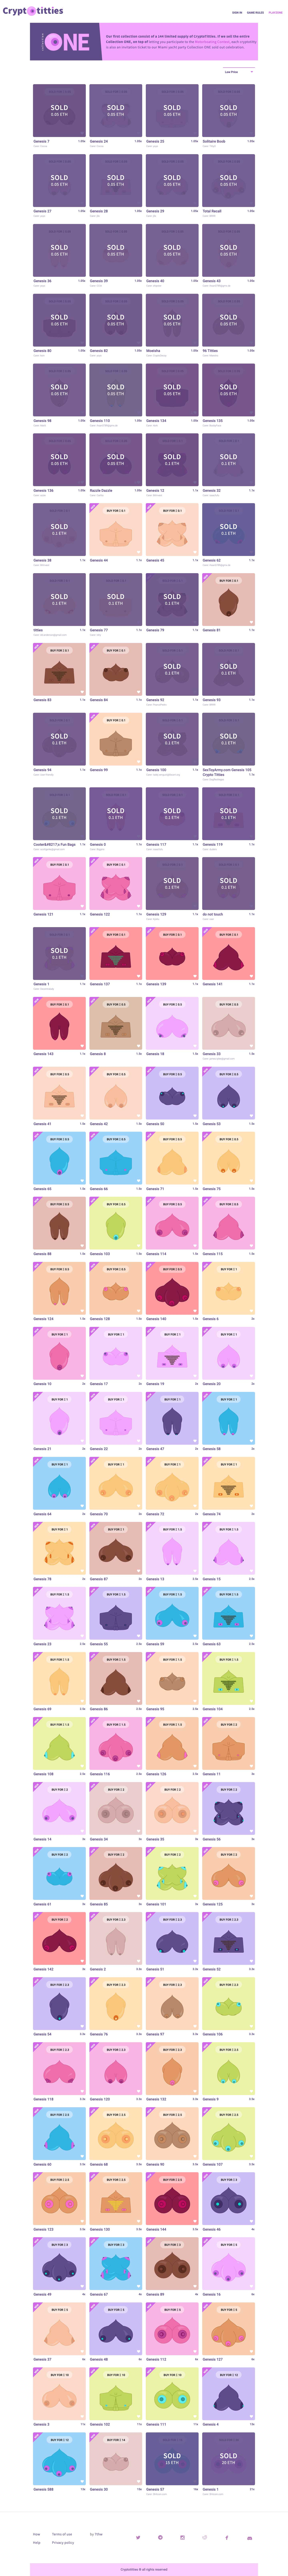 144 Images of NFT Cryptotitties on the marketplace. Colorful square drawing of titties in a simple vectorial style